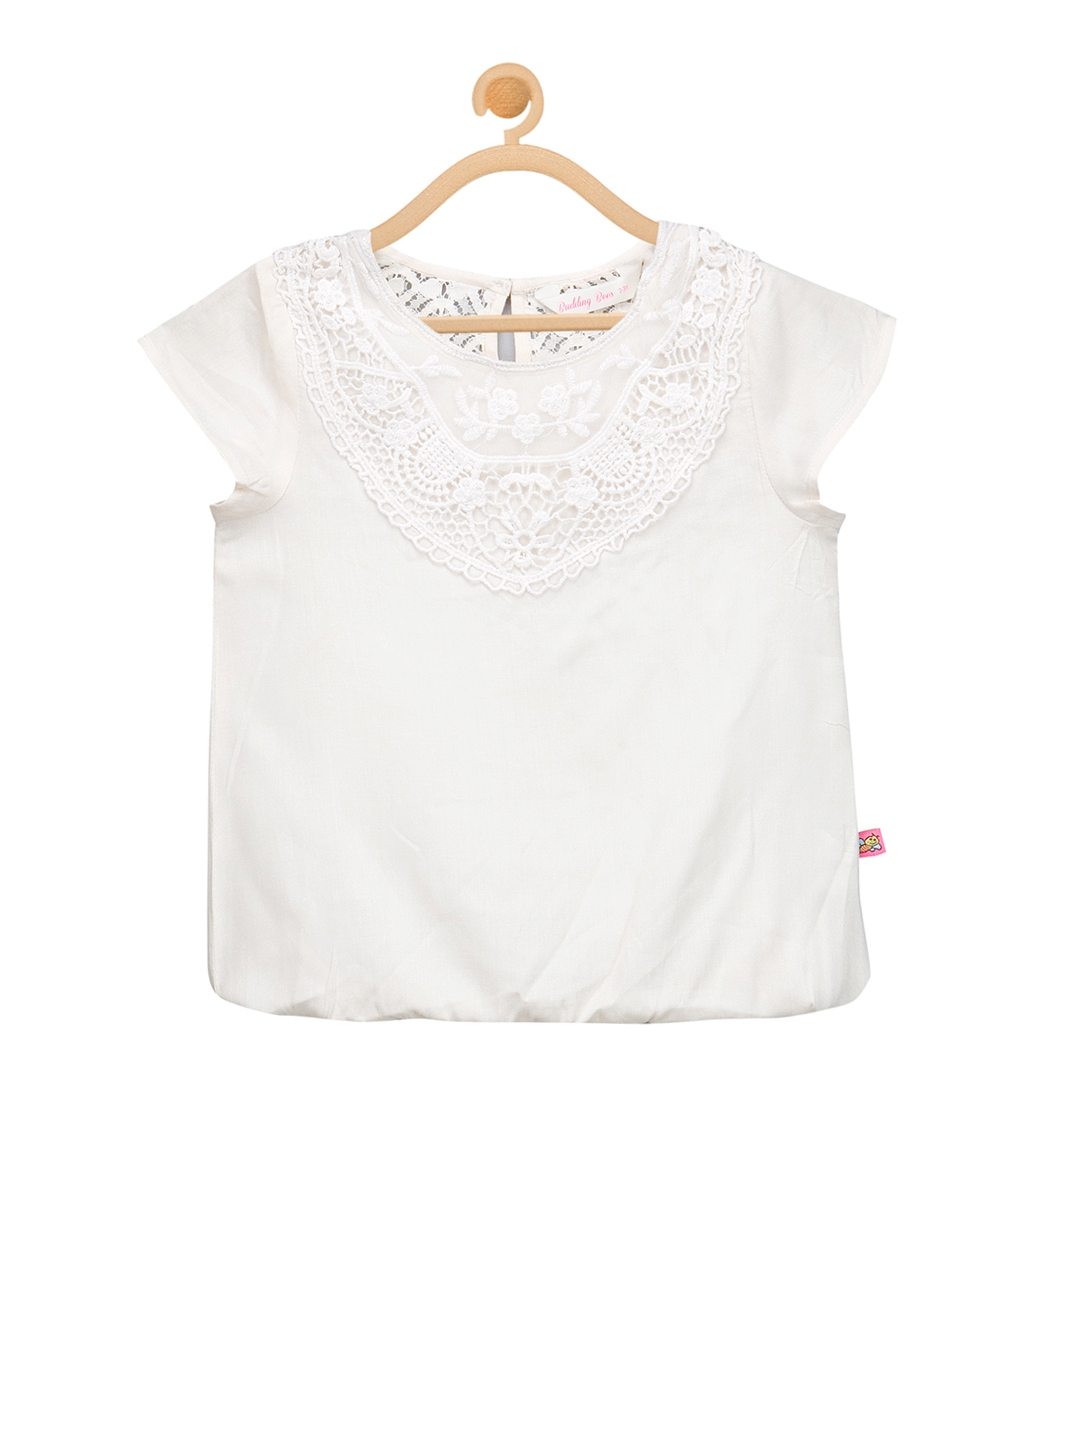 Buy Budding Bees Girls Off White Solid Top - Tops for Girls 2339869 ...